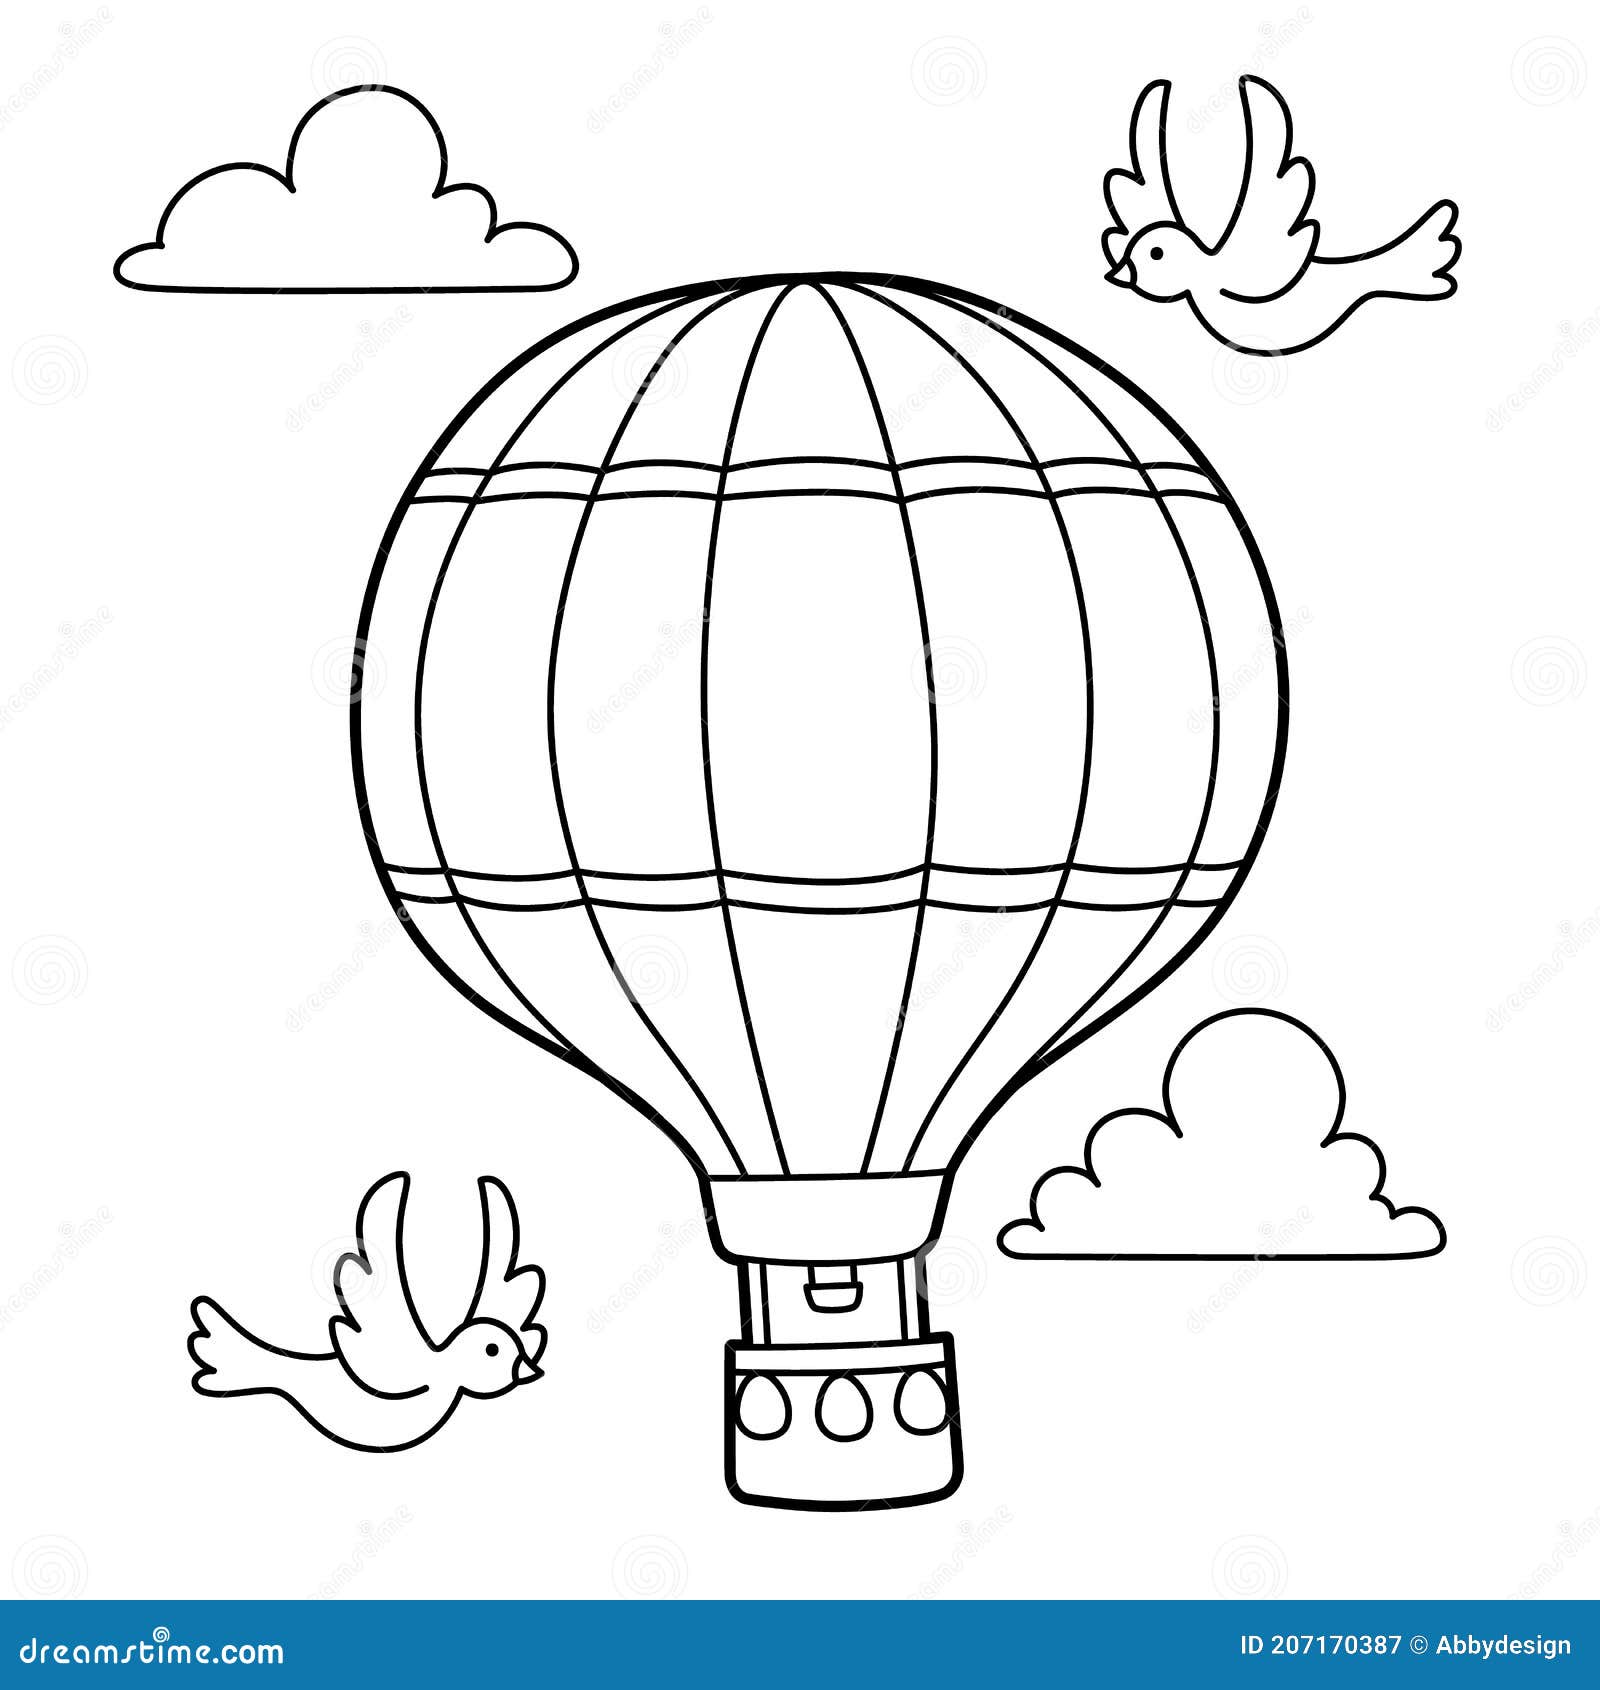 Coloring Page Hot Air Balloon Stock Illustrations 170 Coloring Page Hot Air Balloon Stock Illustrations Vectors Clipart Dreamstime